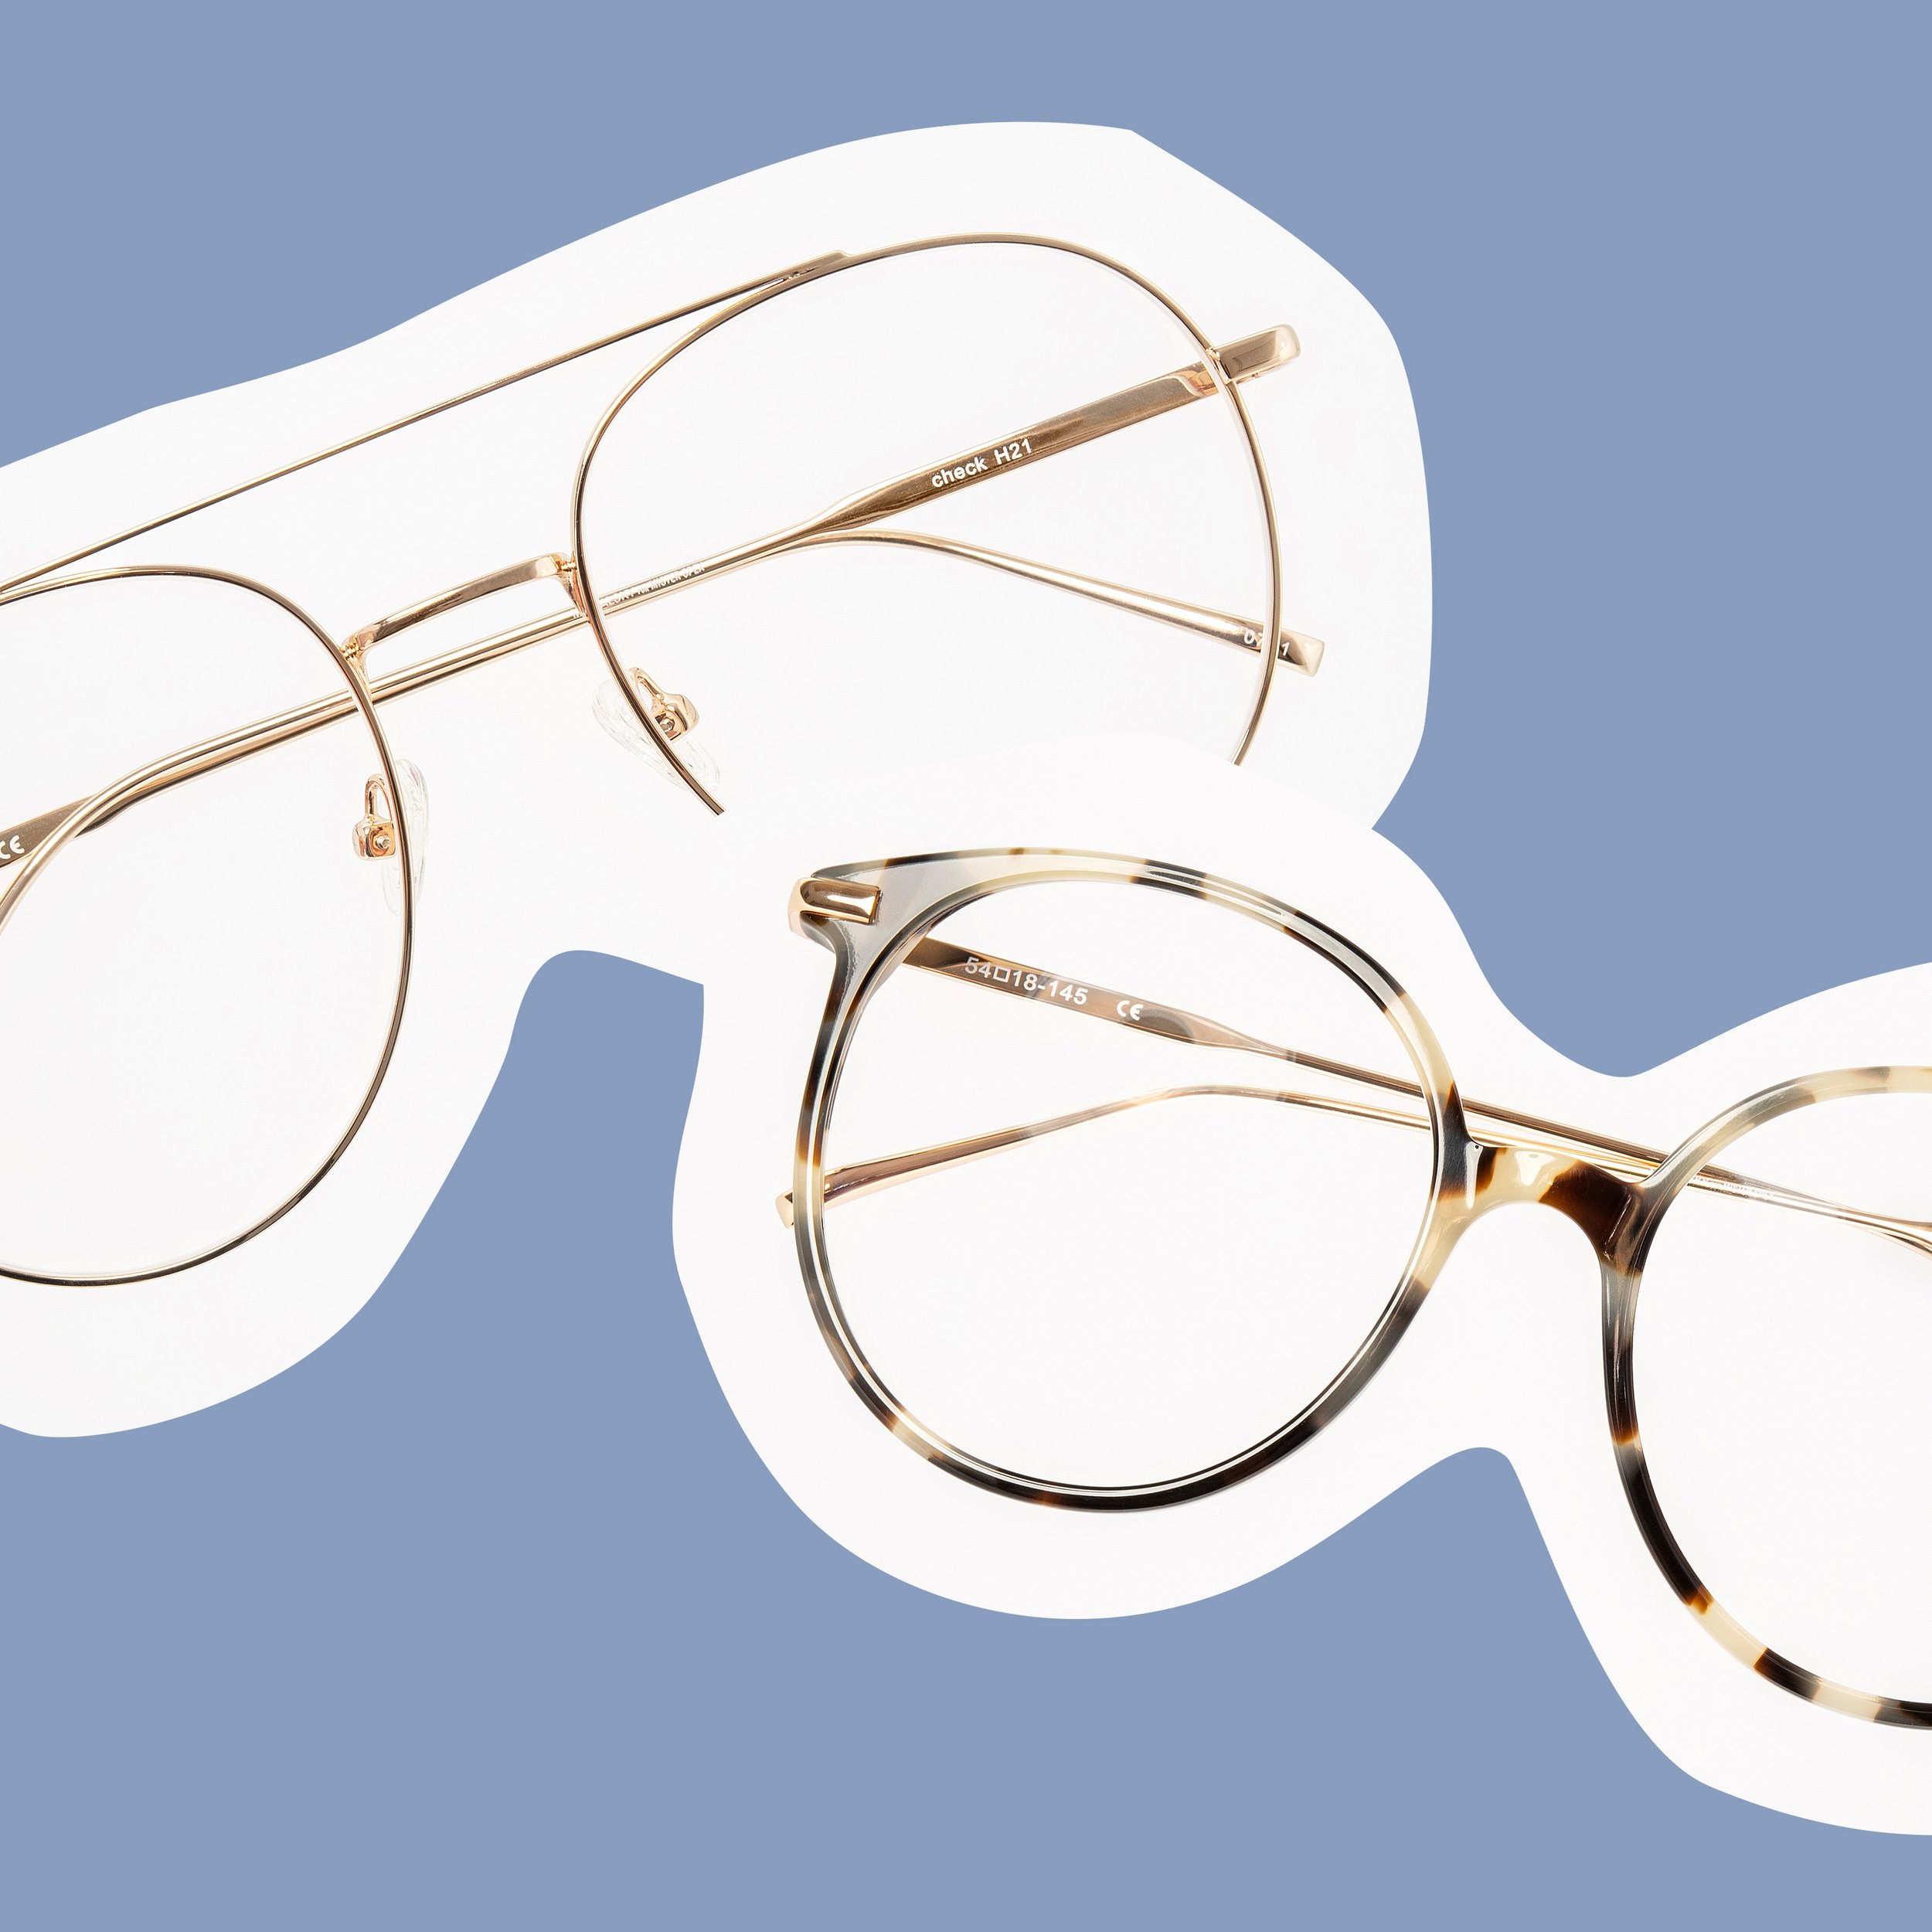 michalsky for mister spex-6848443_check H21-6848417_outshine R22.jpg